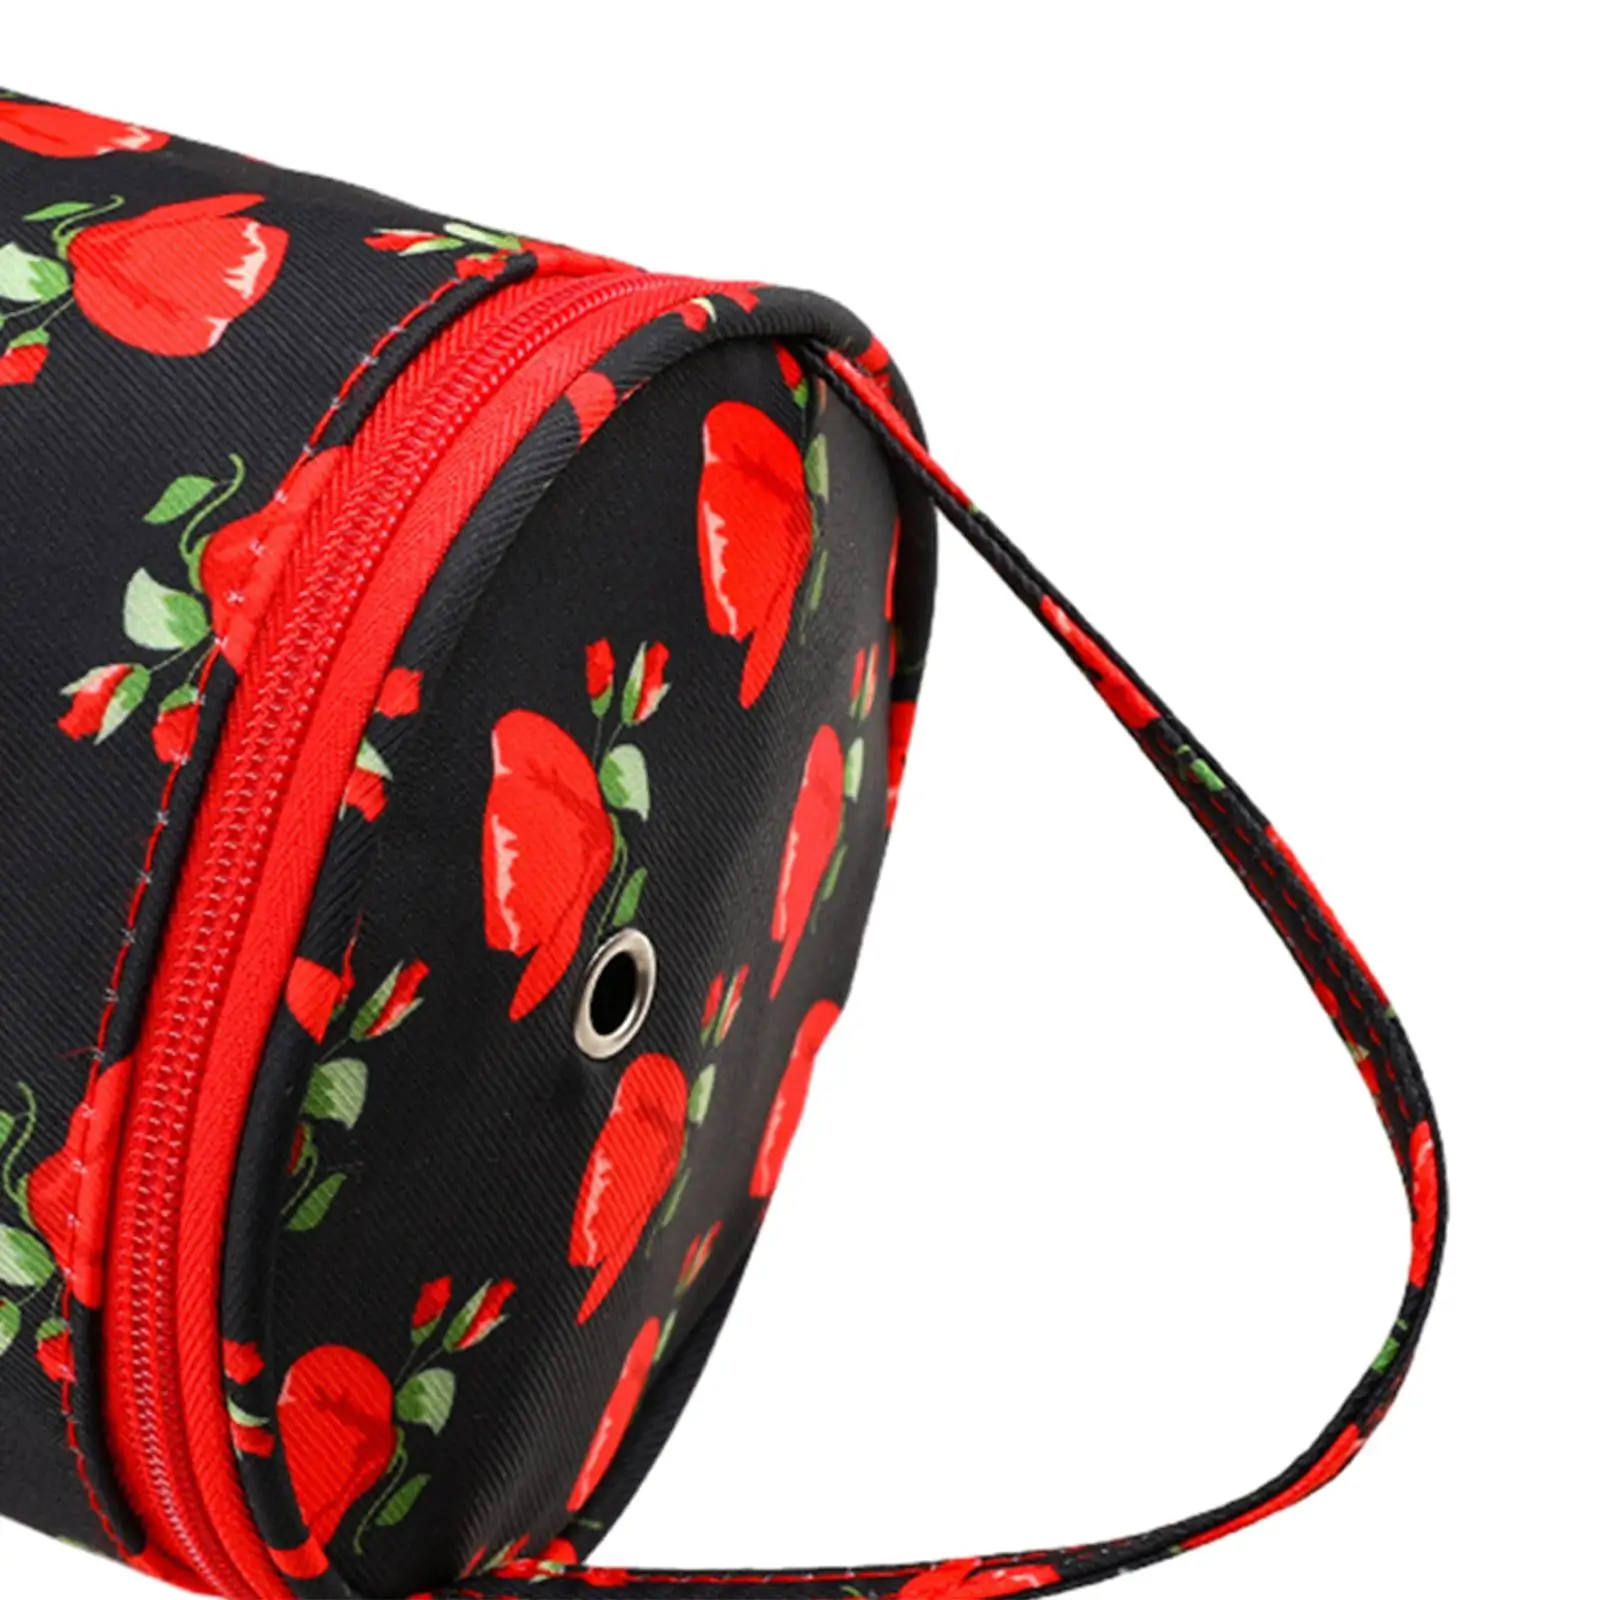 Yarn Case Knitting Bag Zippered Traveling Case Carrying Case Small Organizer